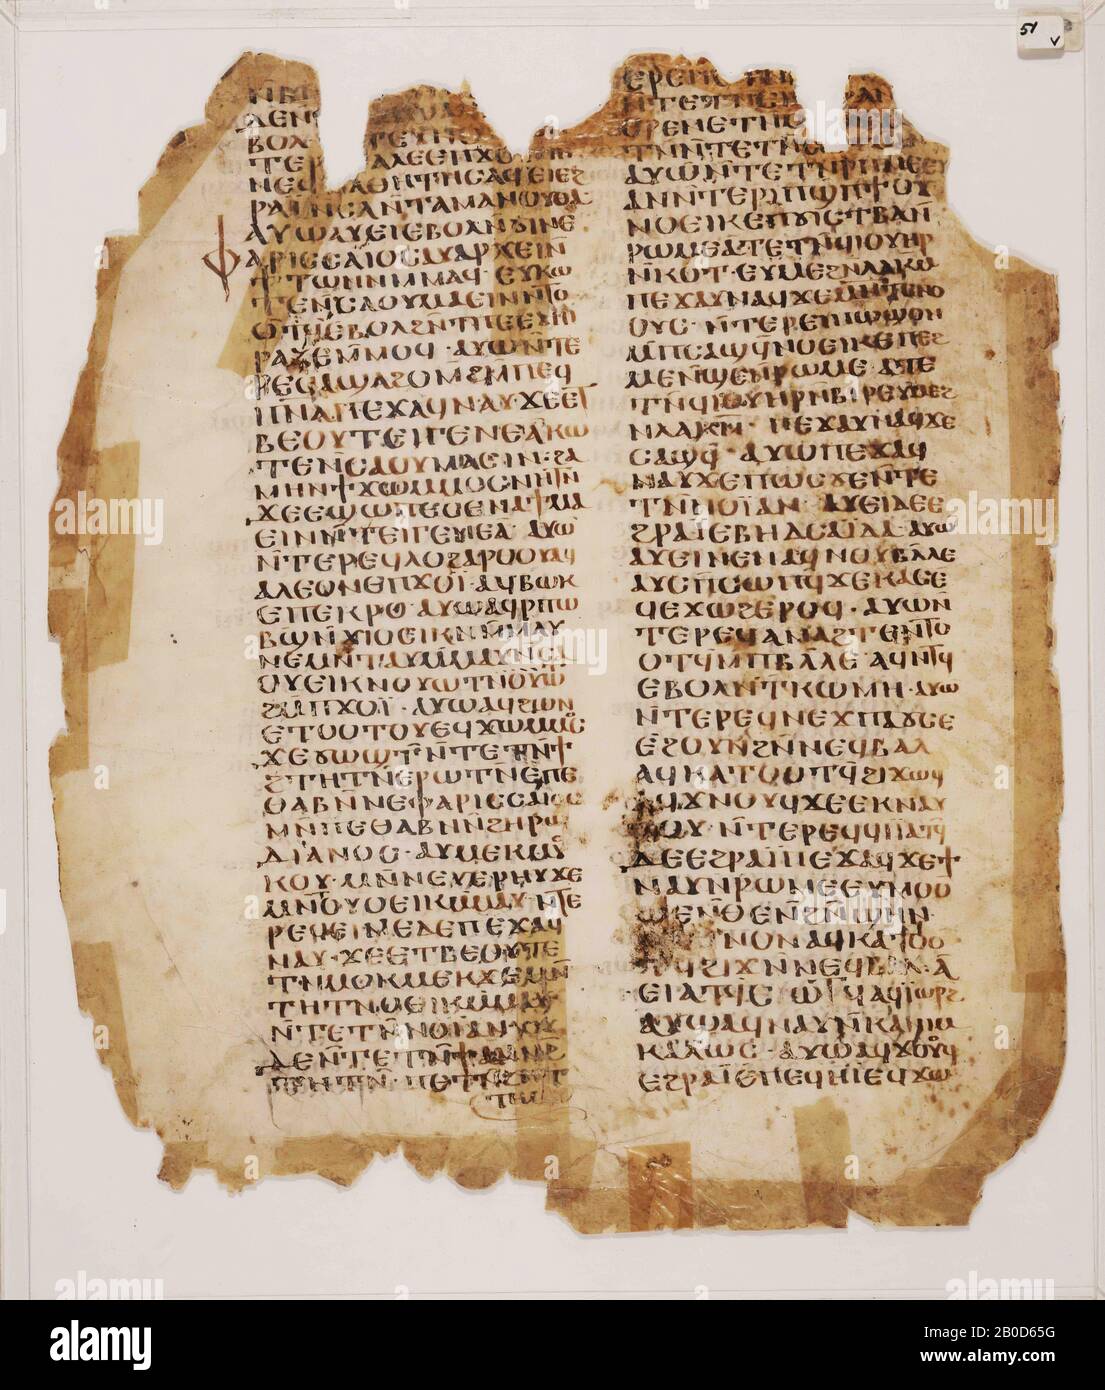 bible text, Marcus, unciaal, 2 column, 39-41 lines, A: Mode of framing: parchment between double glazing, B: Classification :, 1. Number of columns: recto 2 - verso 2, Rt. I: 41 lines, Rt. II: 41 lines, Vs. I: 41 lines, Vs. II: 39 lines, 2. Scripture: Coptic, 3. Color ink: brown, 4. Reading direction: L&gt; R, 5. Number of vignettes: none, 6. Color vignettes: n / a, C: Description Stock Photo